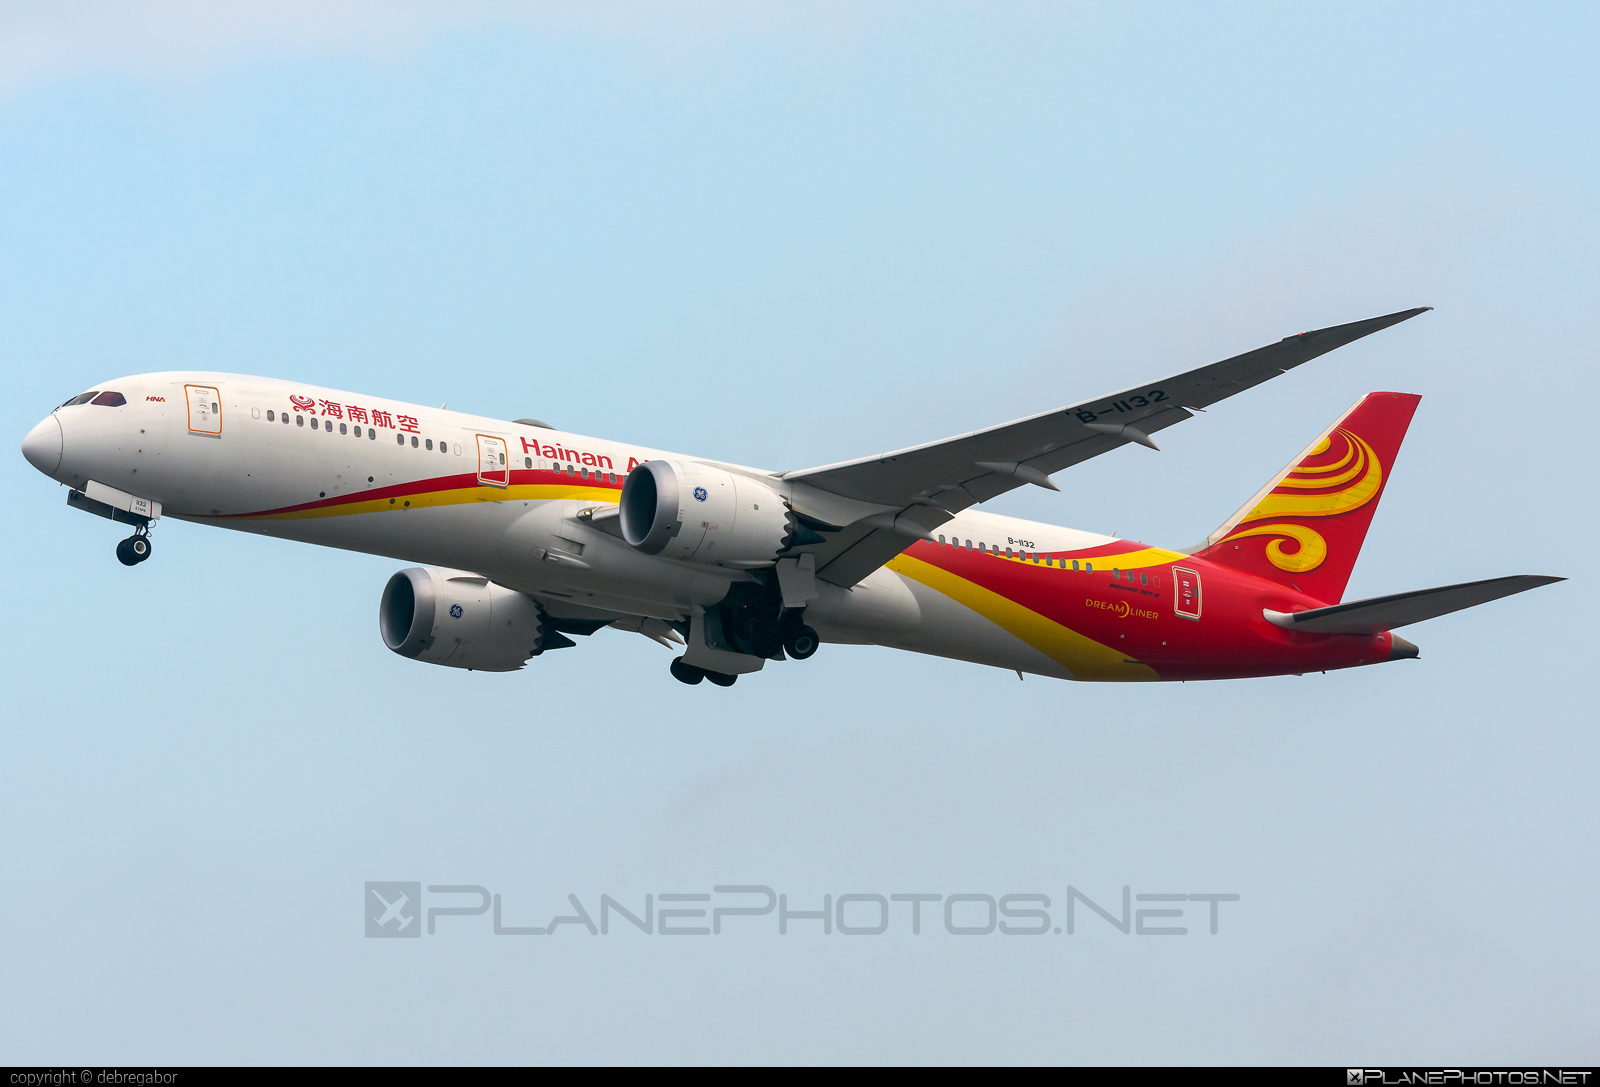 Boeing 787-9 Dreamliner - B-1132 operated by Hainan Airlines #b787 #boeing #boeing787 #dreamliner